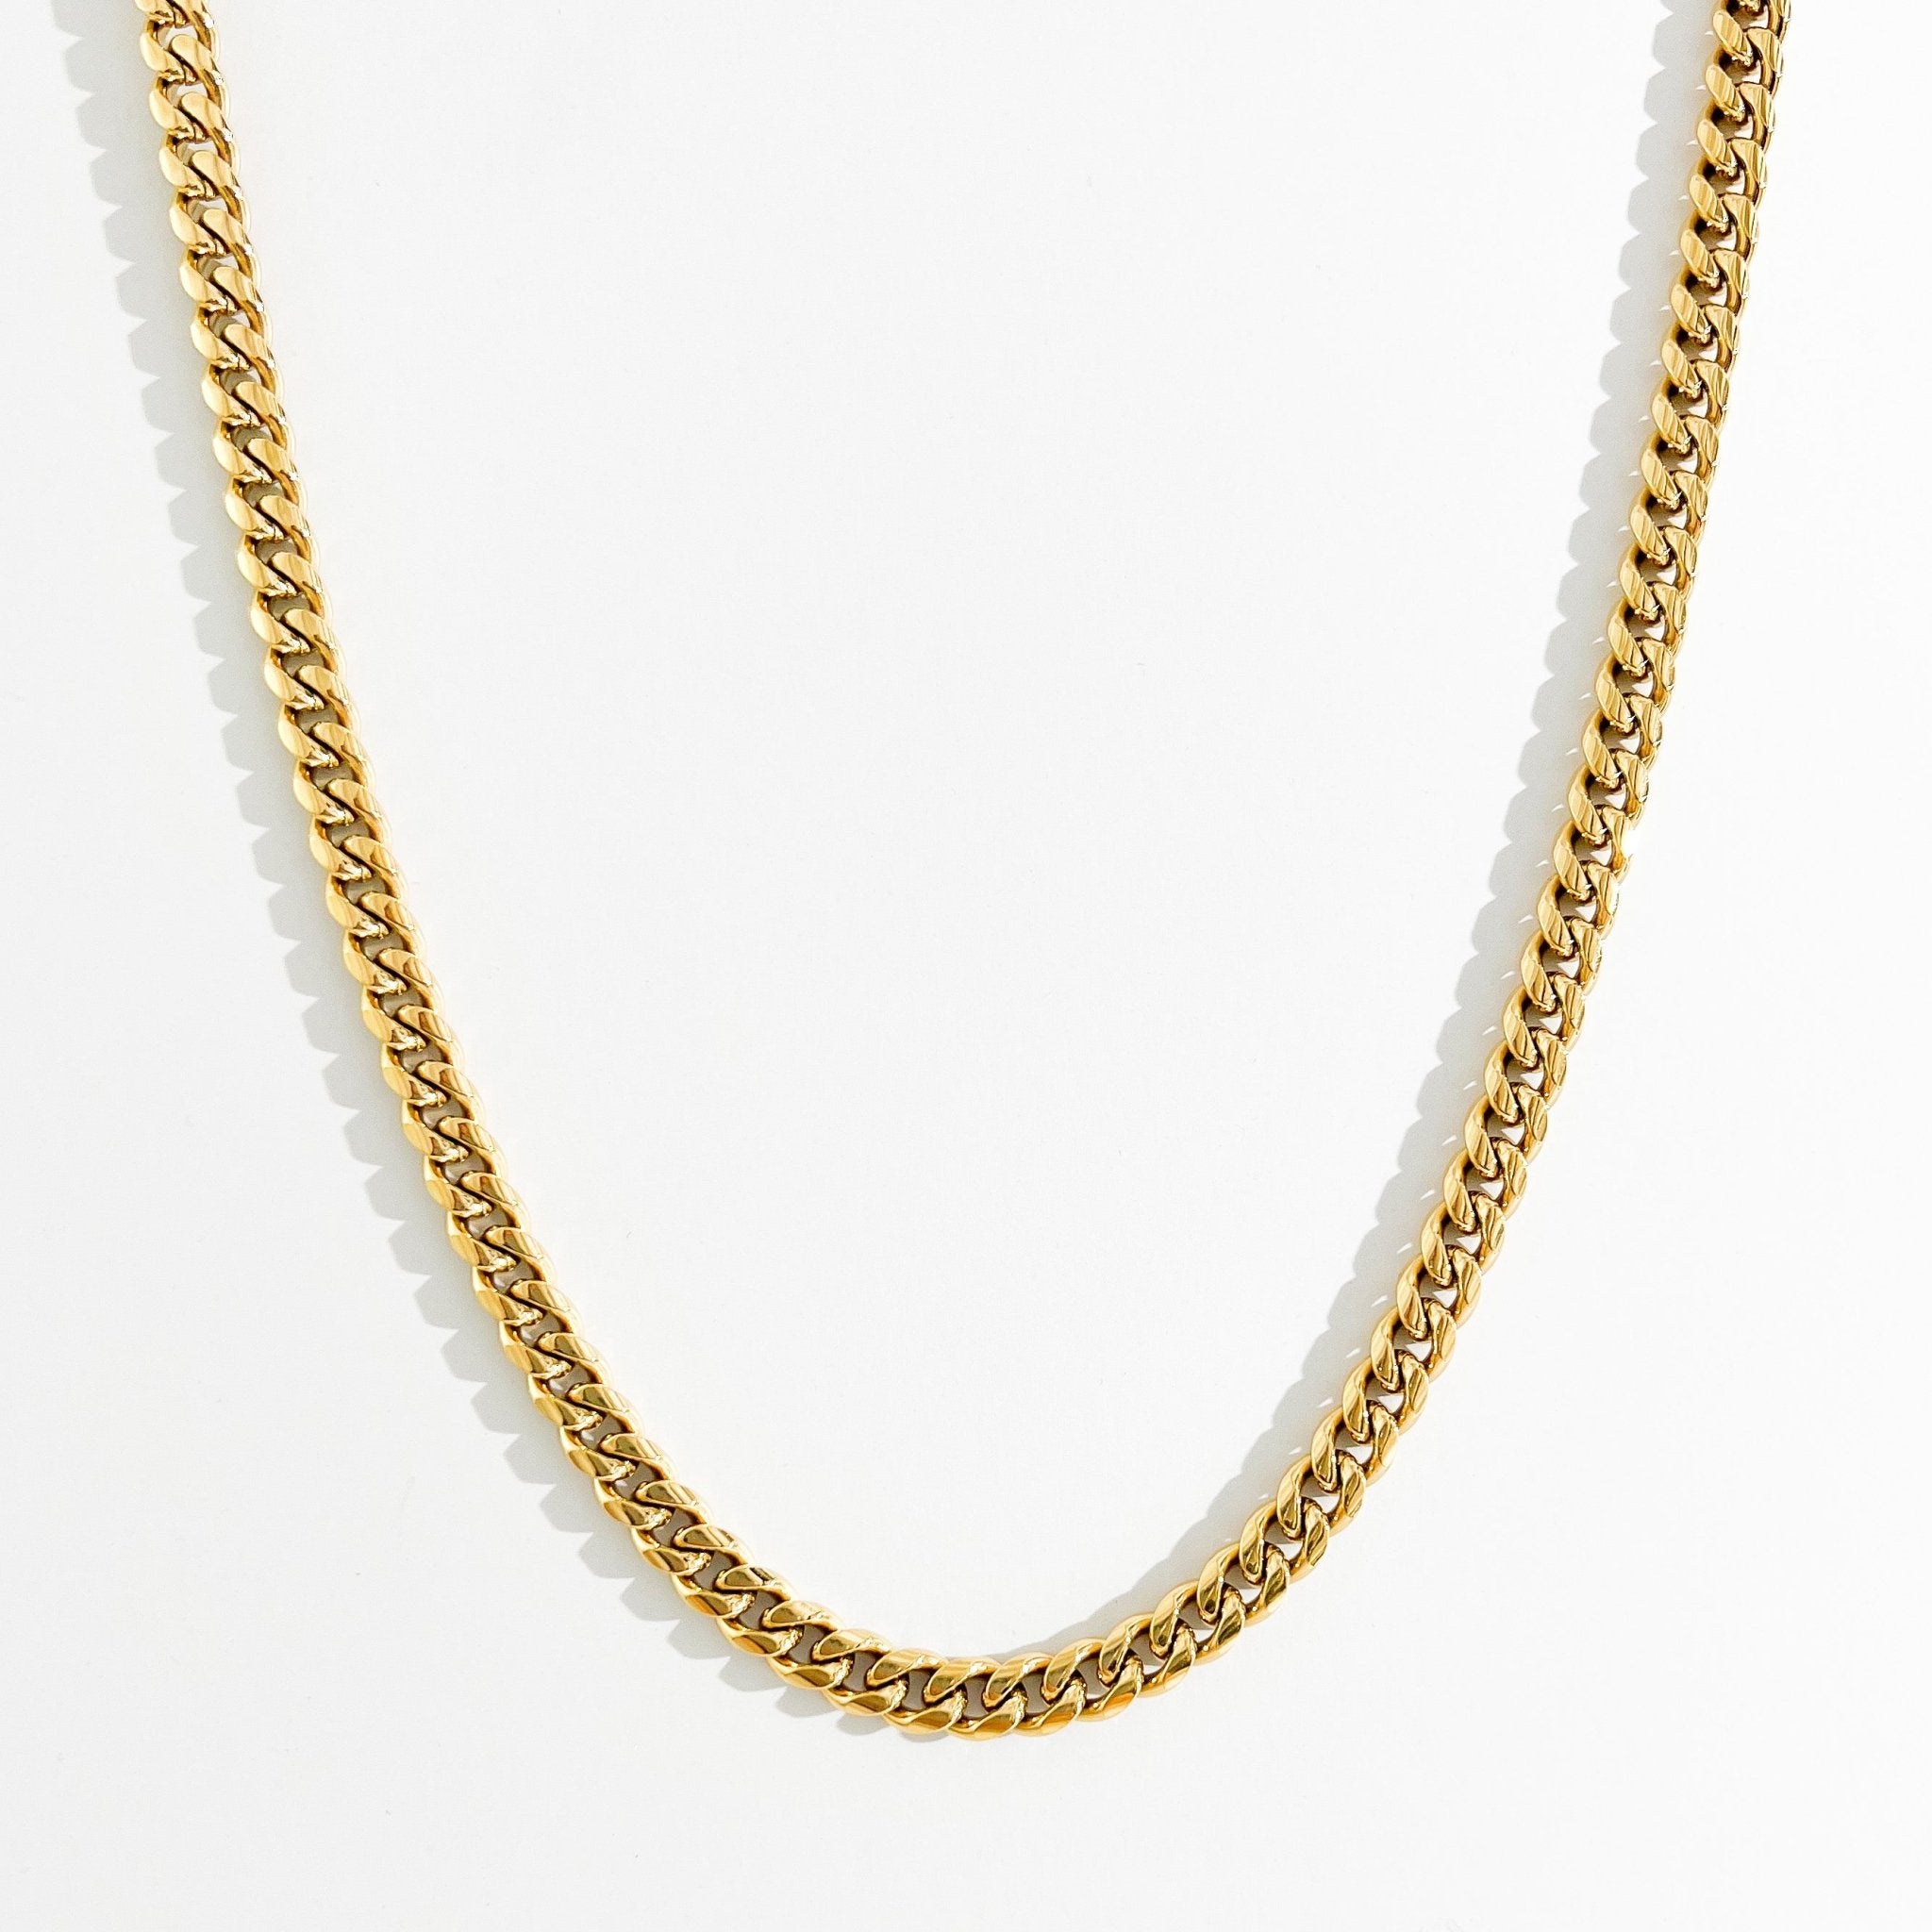 Jamie Curb Chain in Gold (Unisex) - Flaire & Co.